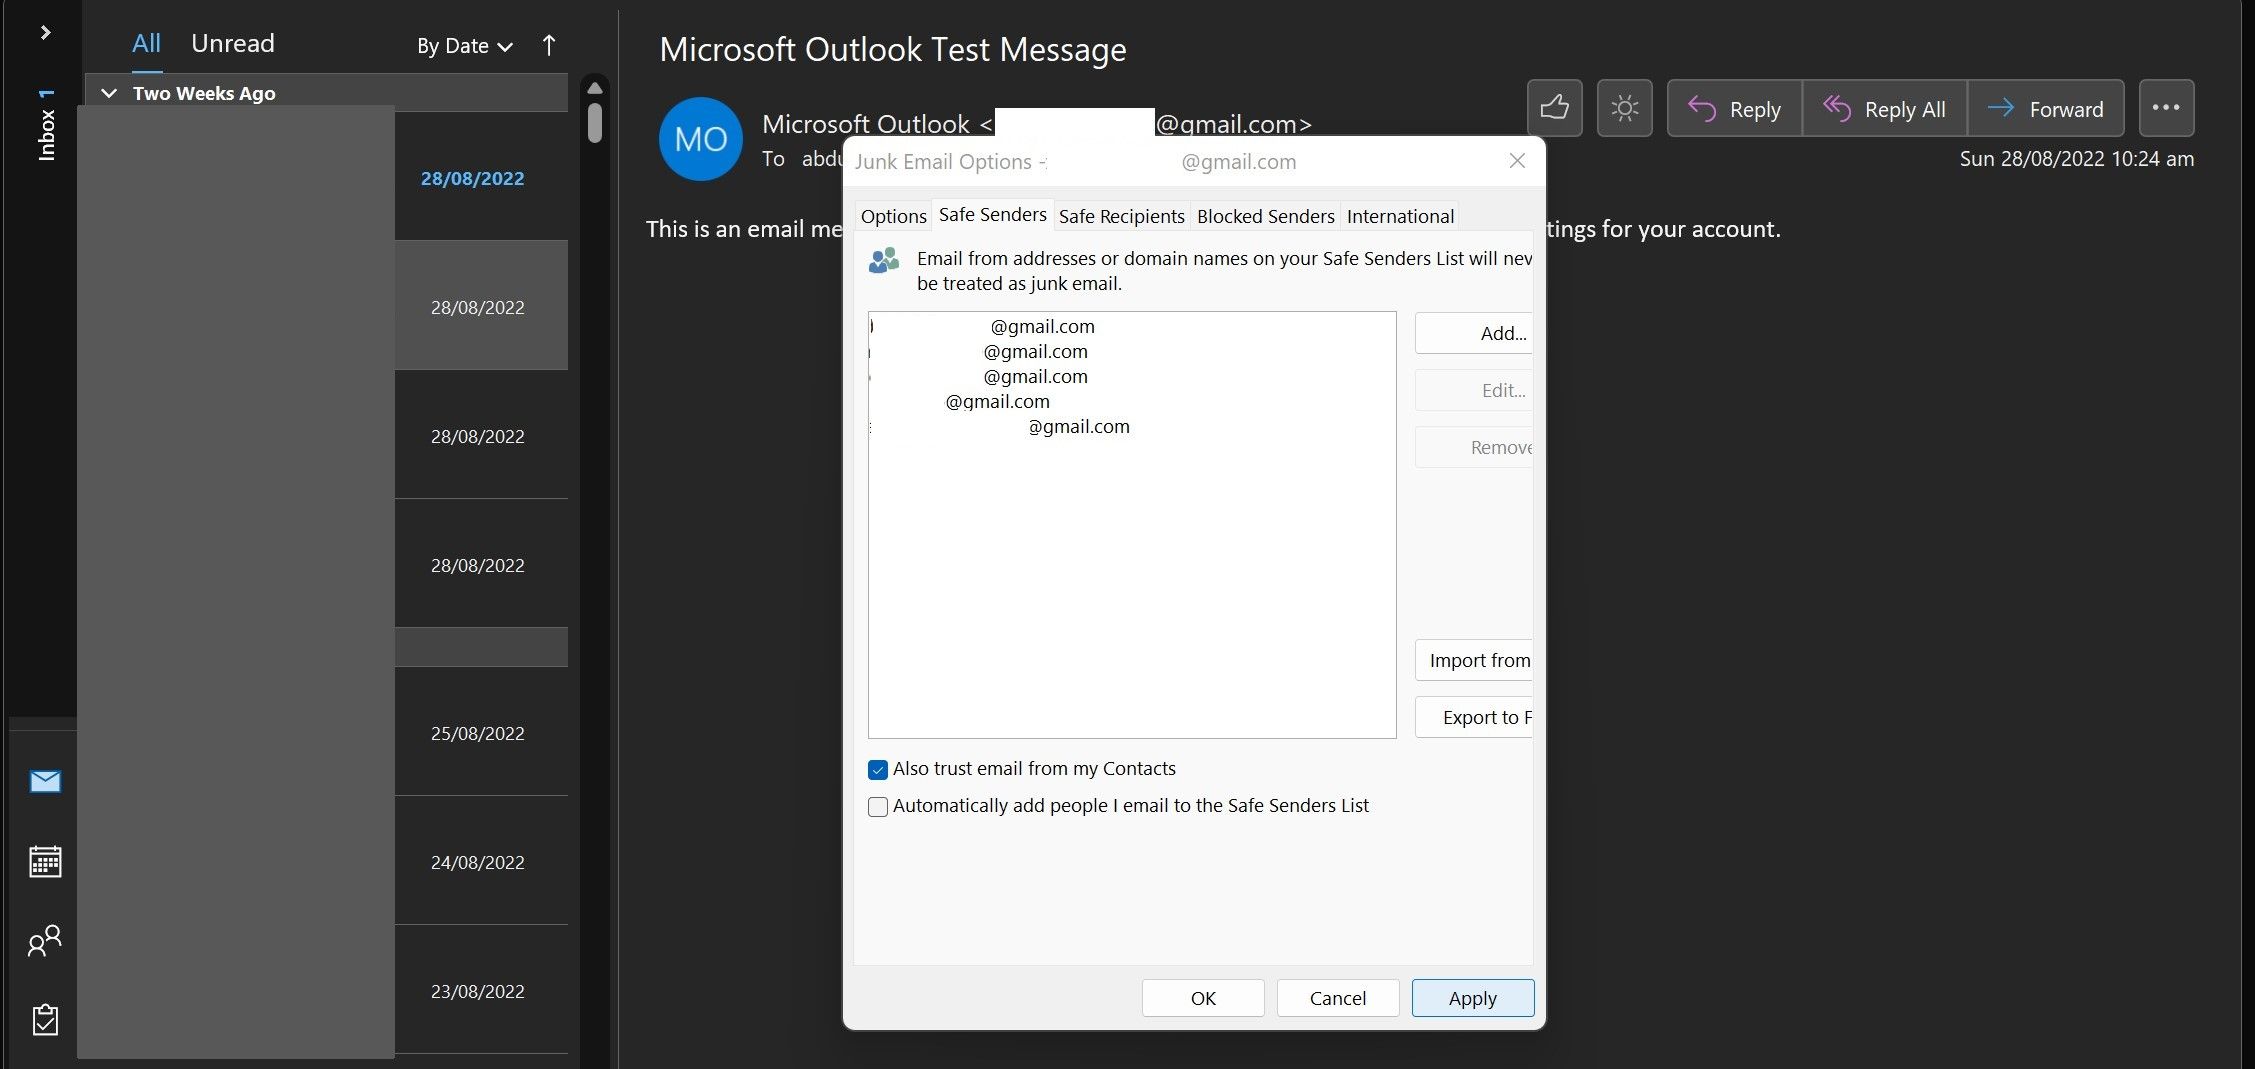 Clicking on Apply and Ok Button after Adding the Emails to Whitelist from the Imported File in Outlook